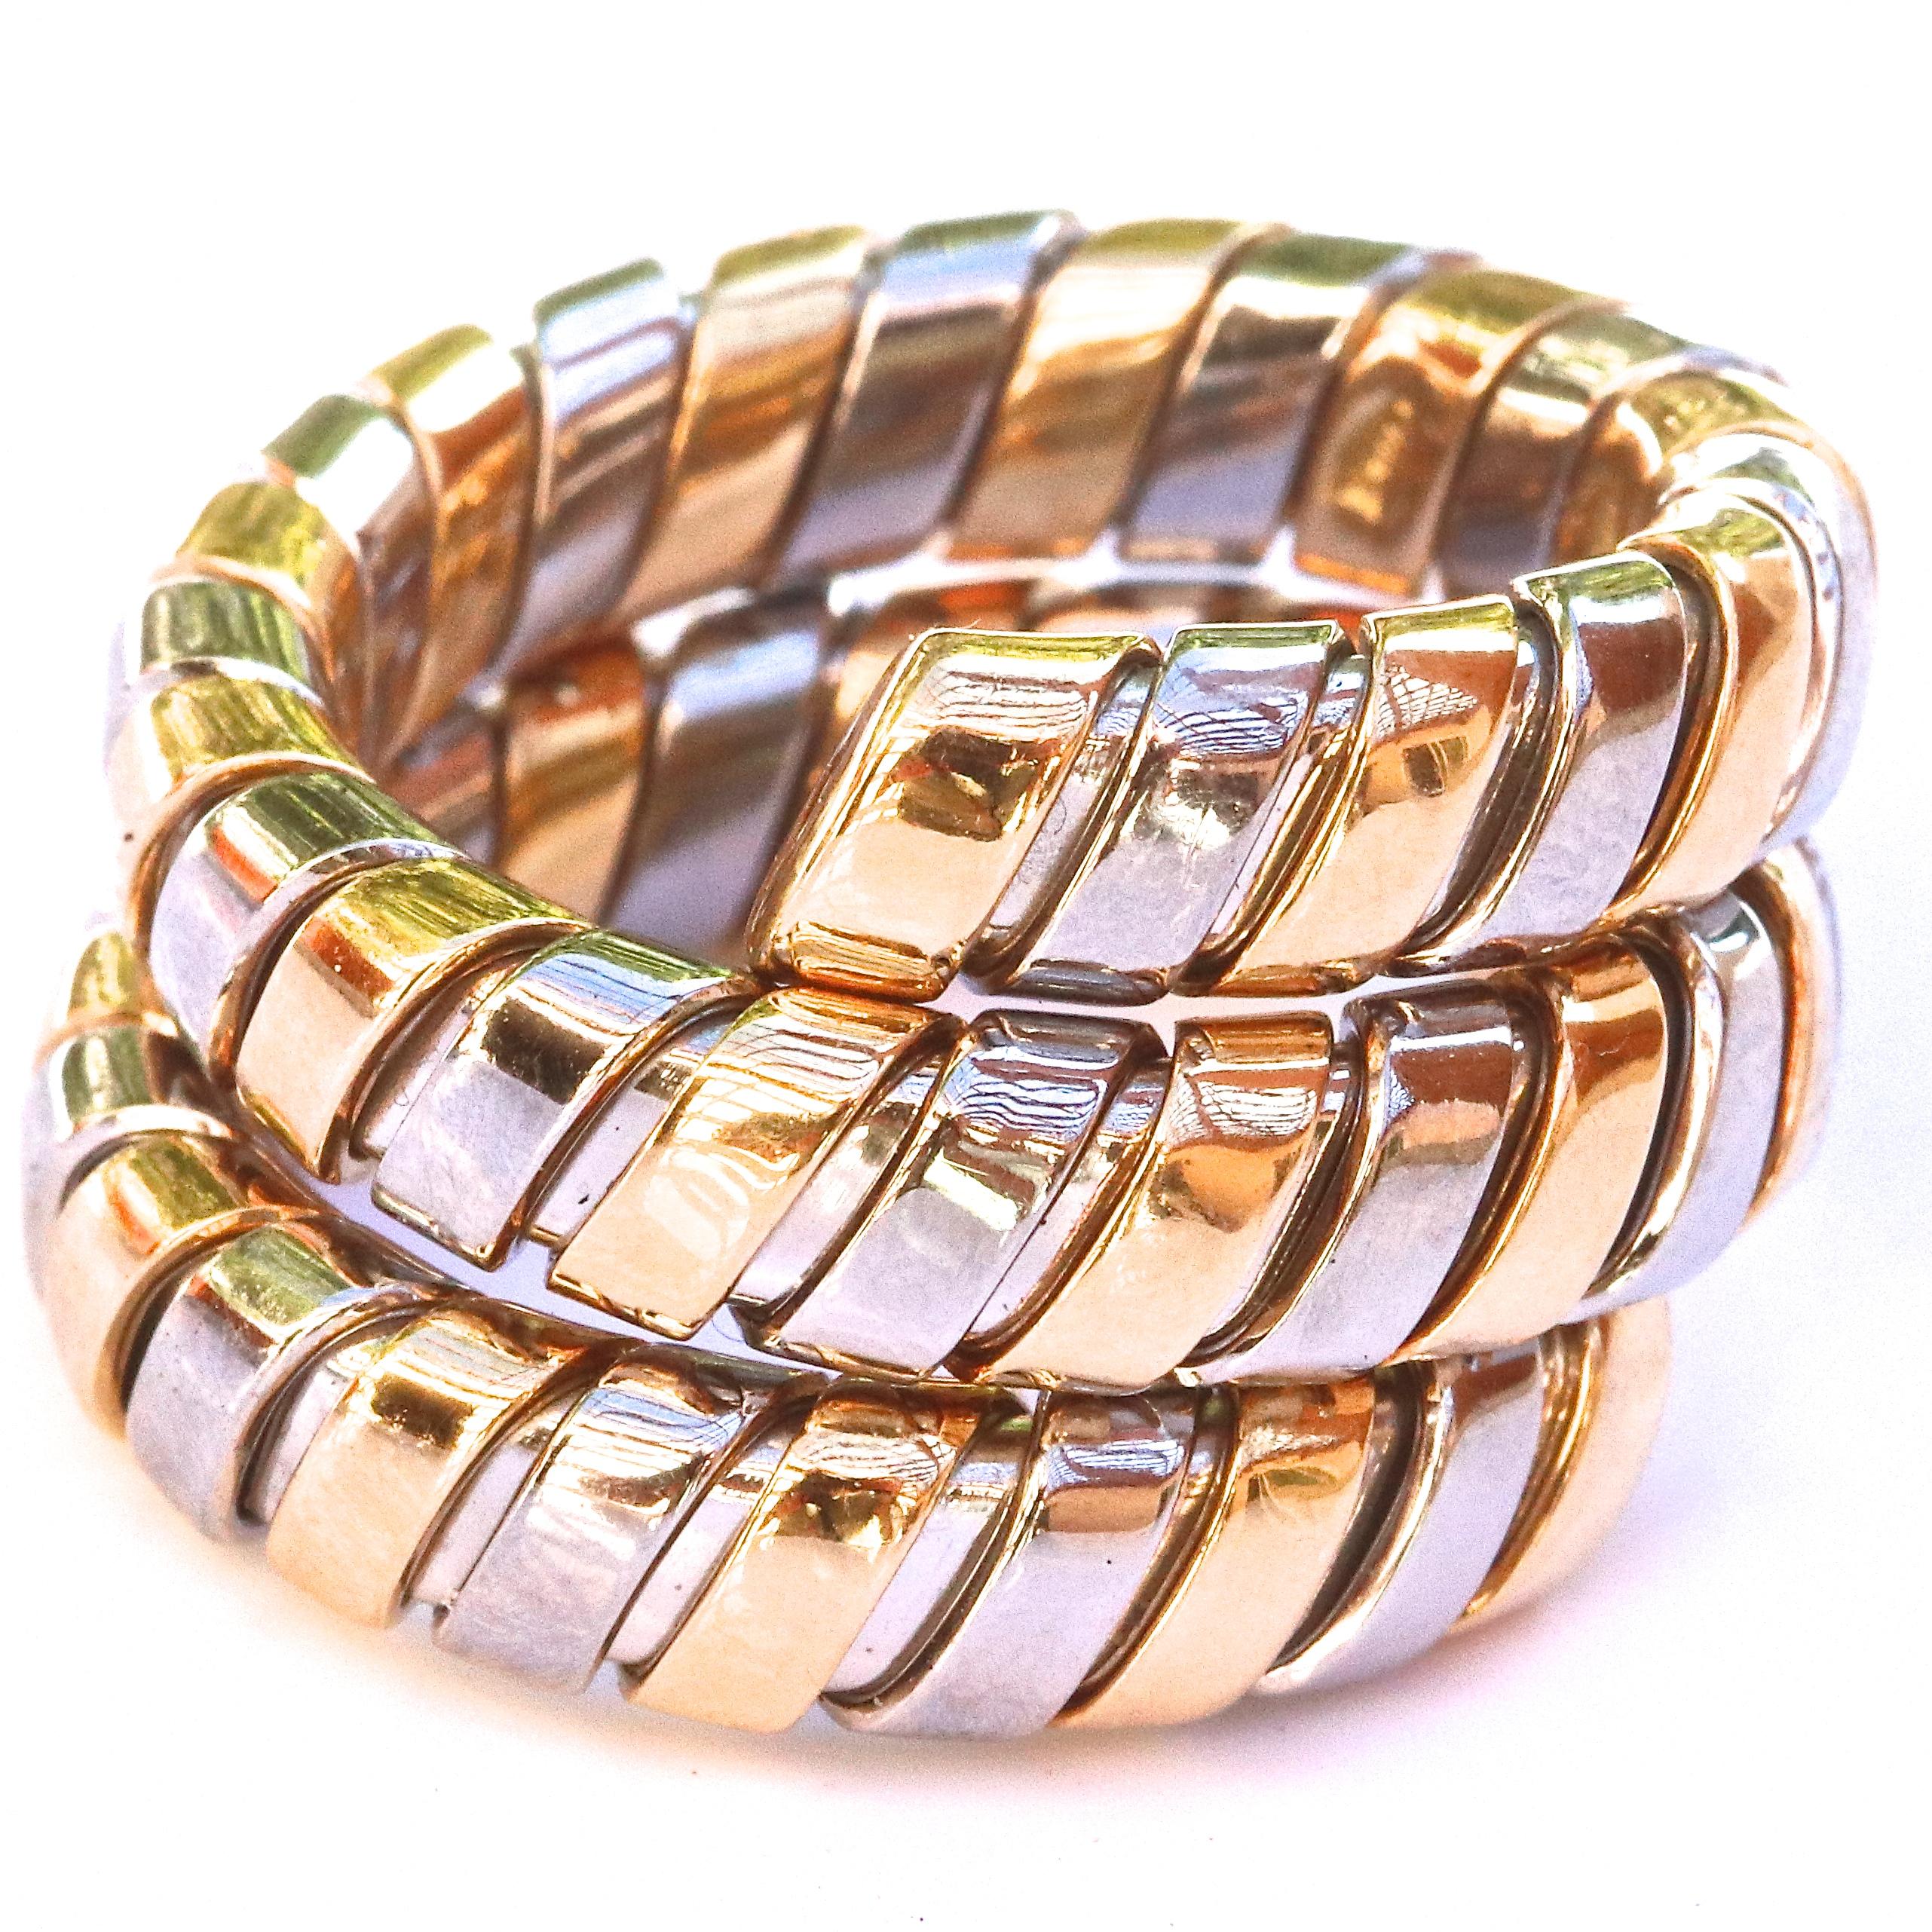 Bulgari 18k yellow gold & stainless steel tubogas ring. Signed Bvlgari and has italian hallmark. Circa 1990s. Size 6. Stamped 750. 
Jack Weir & Sons Flawless Protection Plan: 
7 day return policy for full cash refund
30 day return for store credit